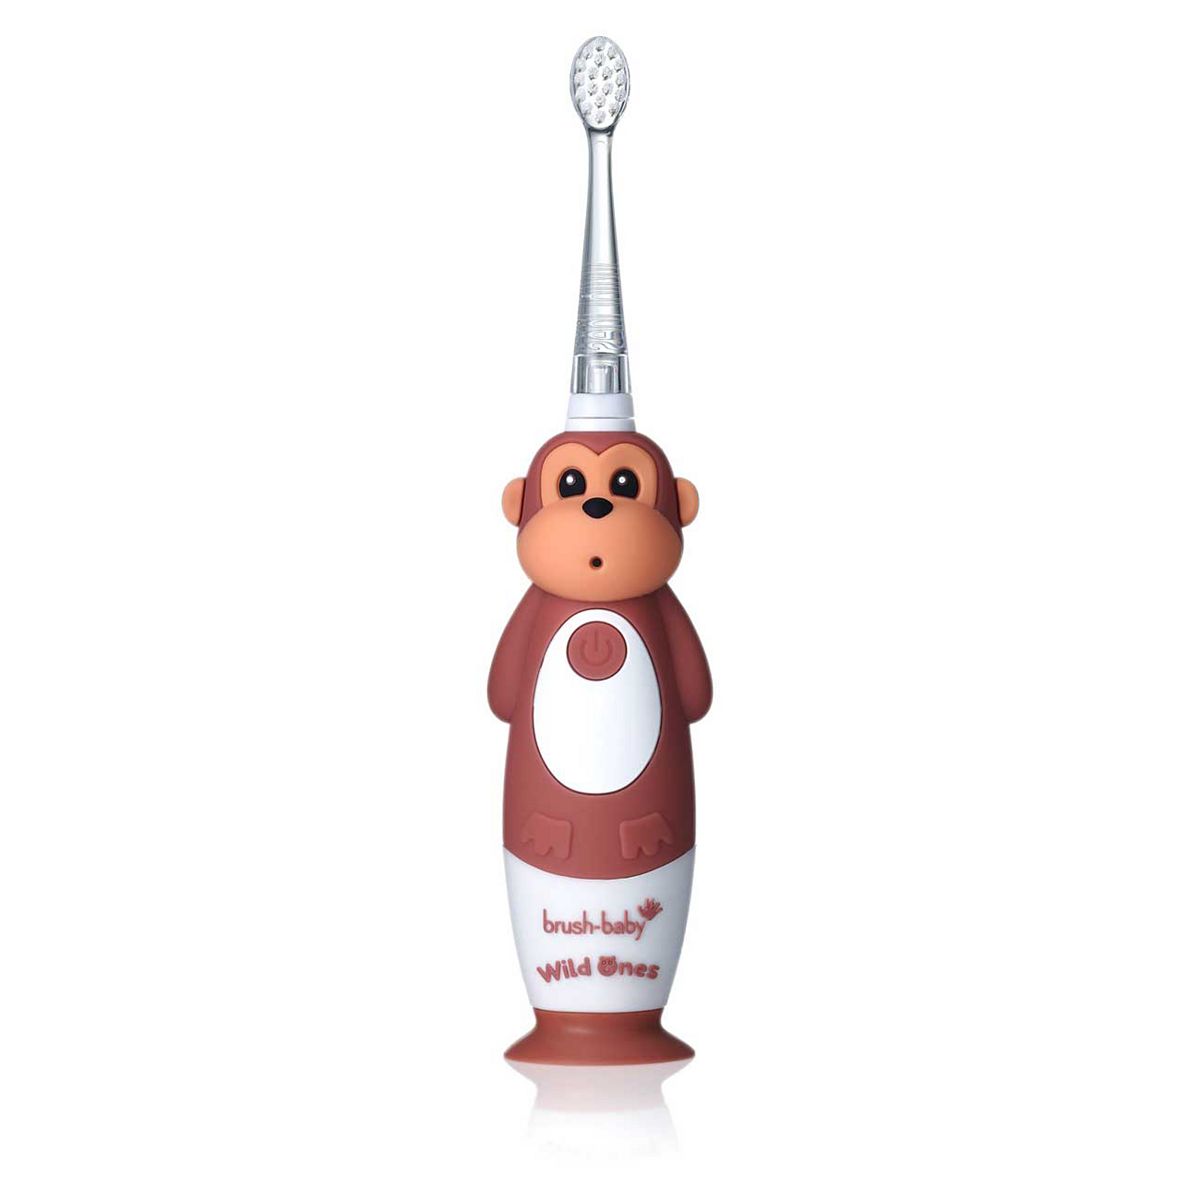 brush-baby WildOnes Monkey Rechargeable Toothbrush GOODS Boots   